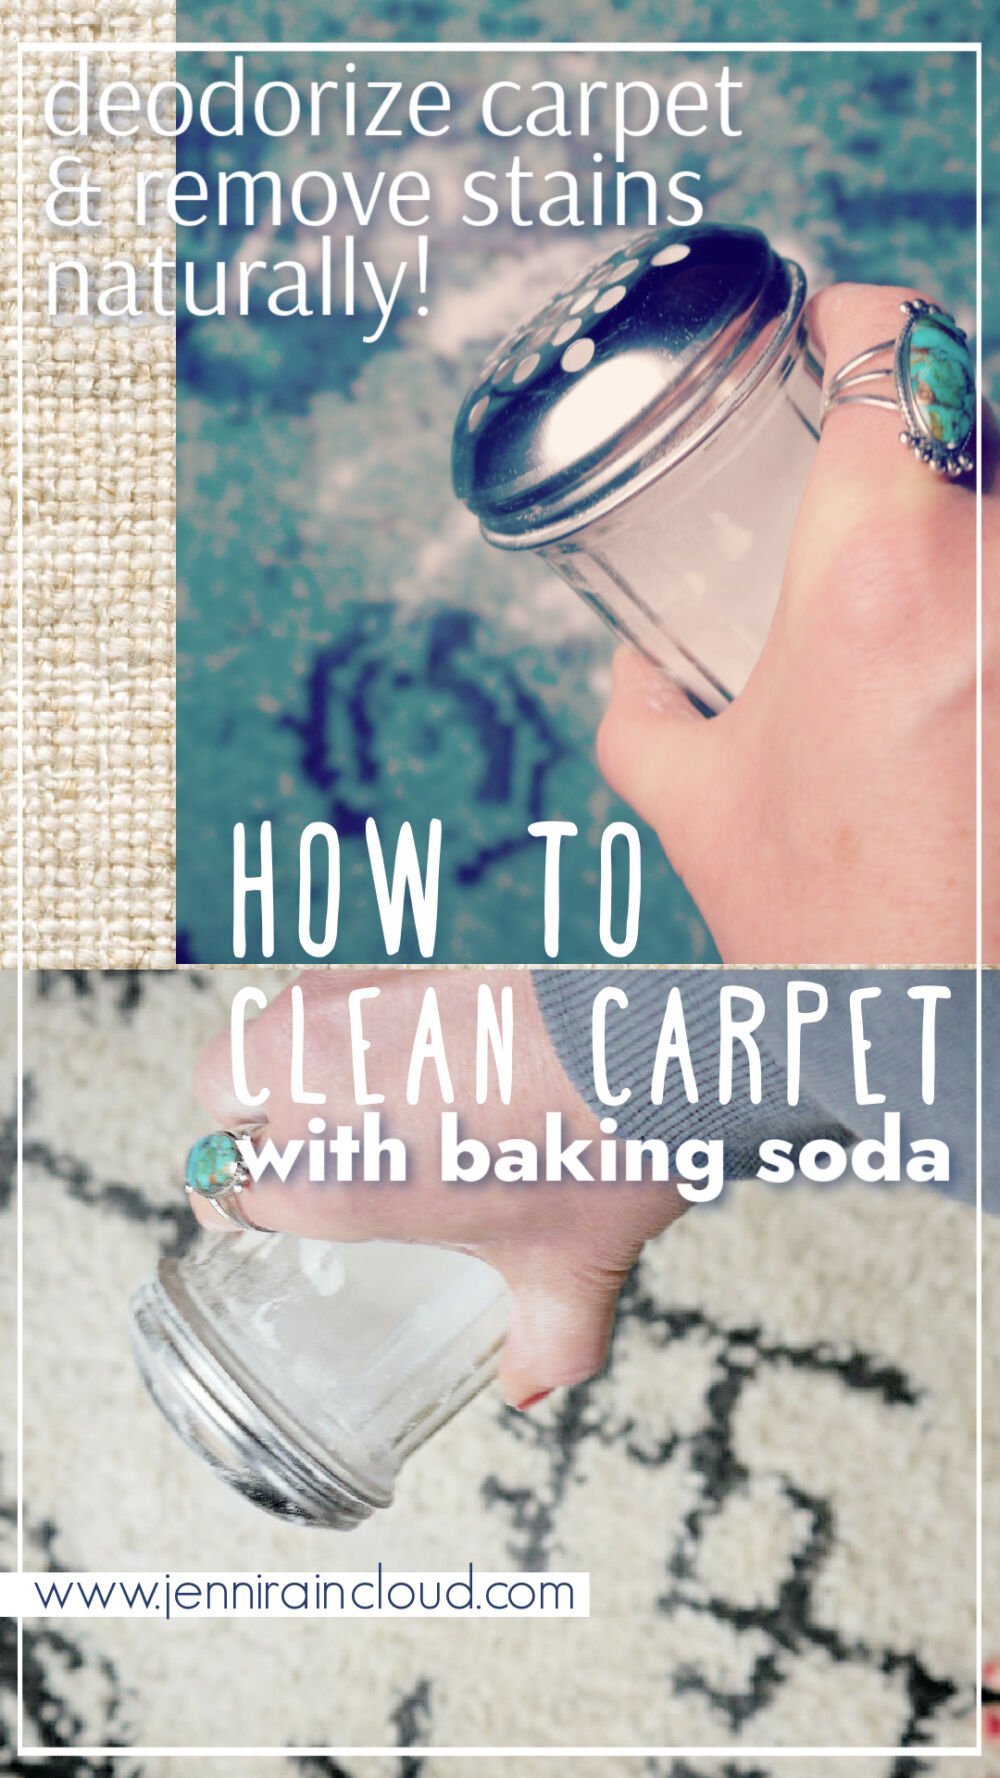 How to clean carpet with baking soda-glass shaker jar and baking soda on rugs.